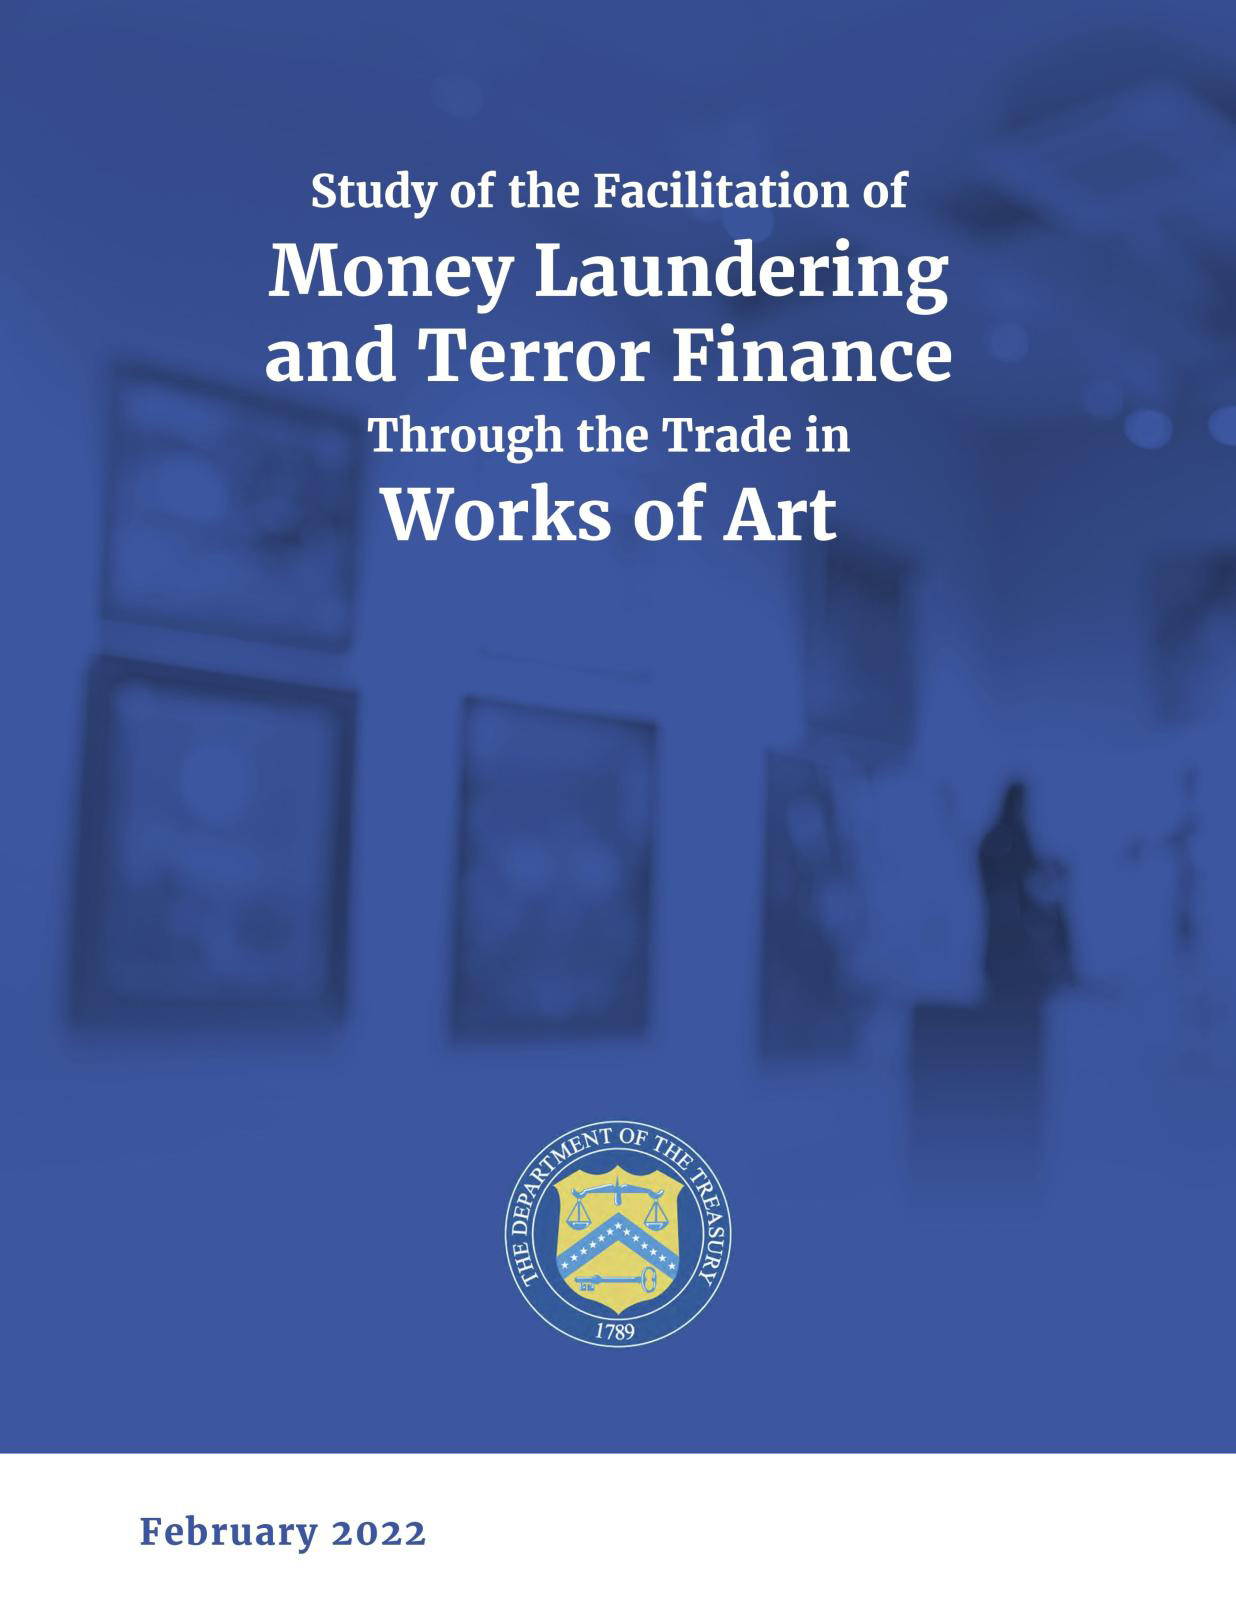 Money Laundering: Art Dealers Appeal to Europe